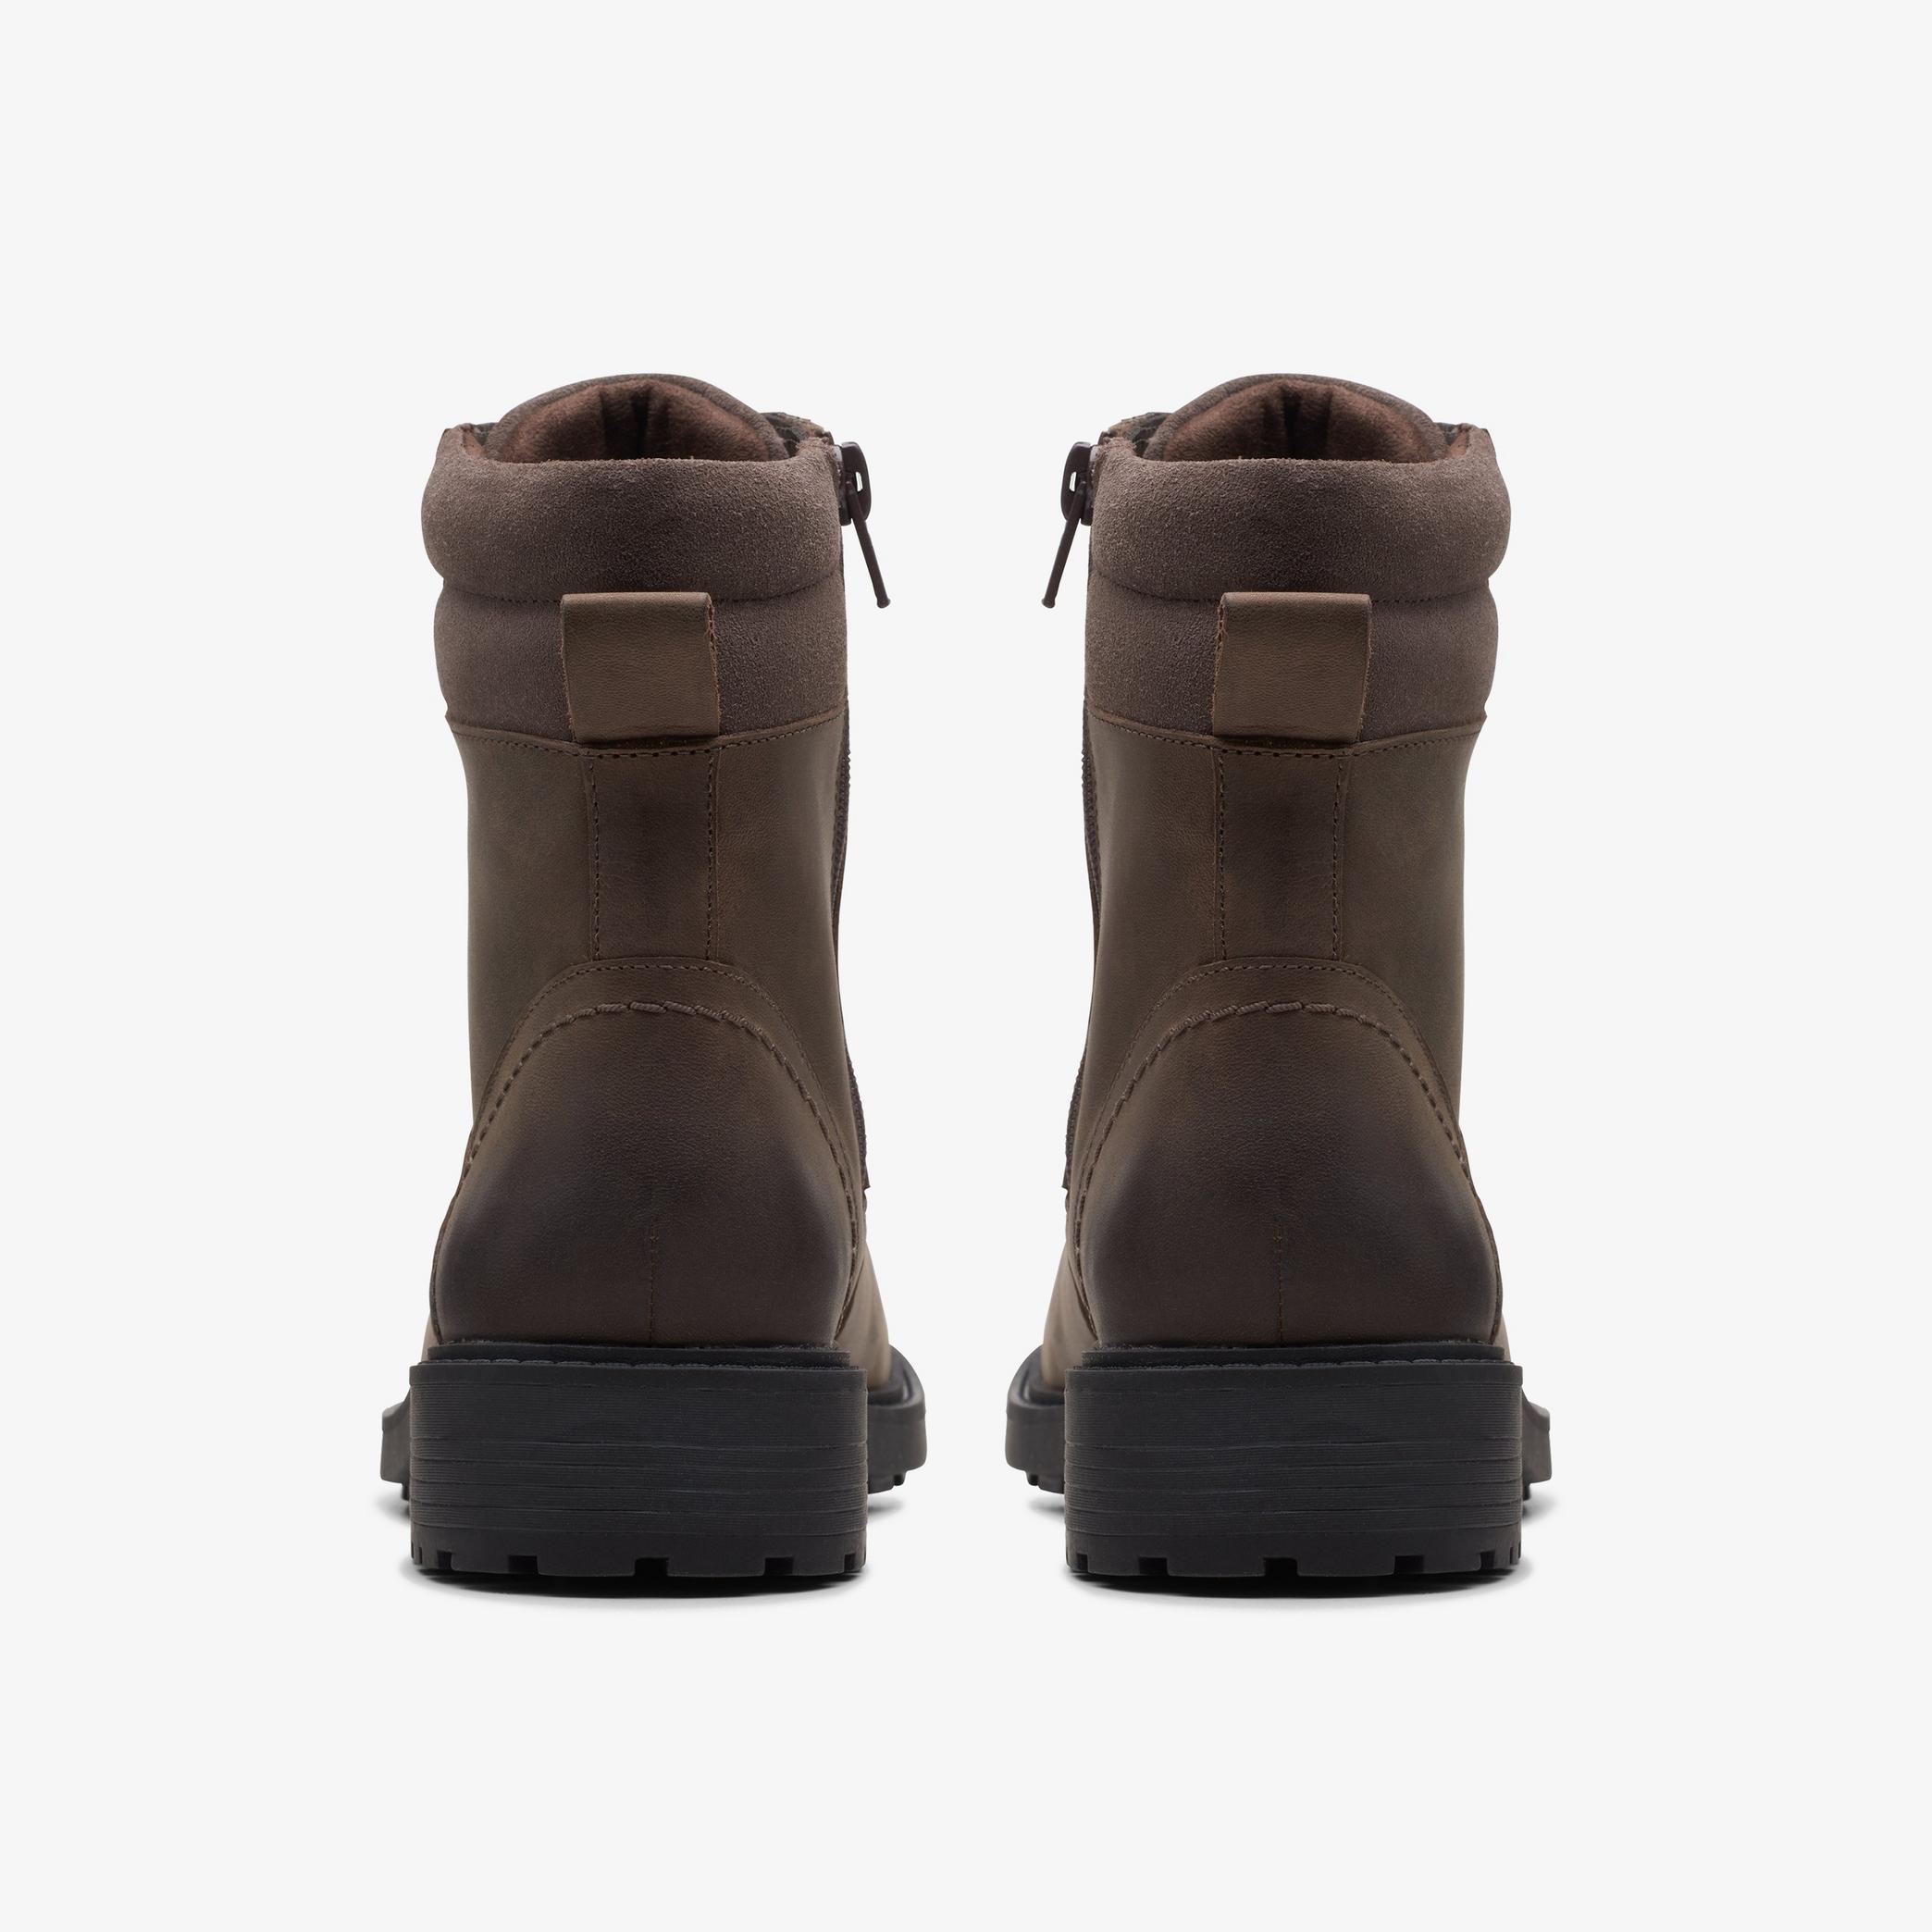 Womens Orinoco2 Spice Taupe Nubuck Boots | Clarks Outlet